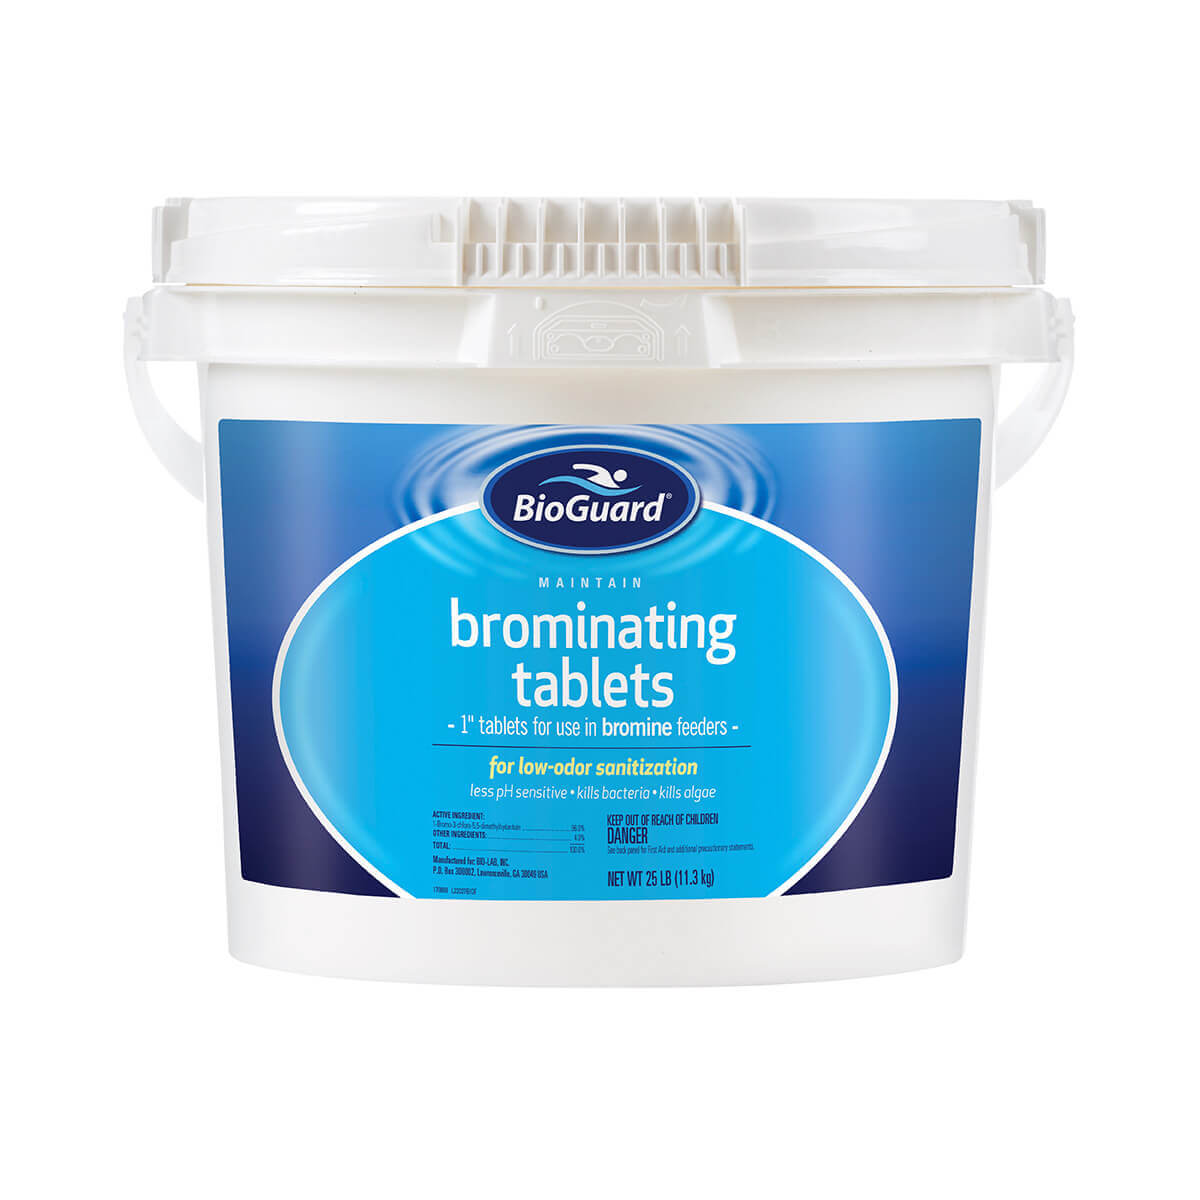 Brominating Tablets